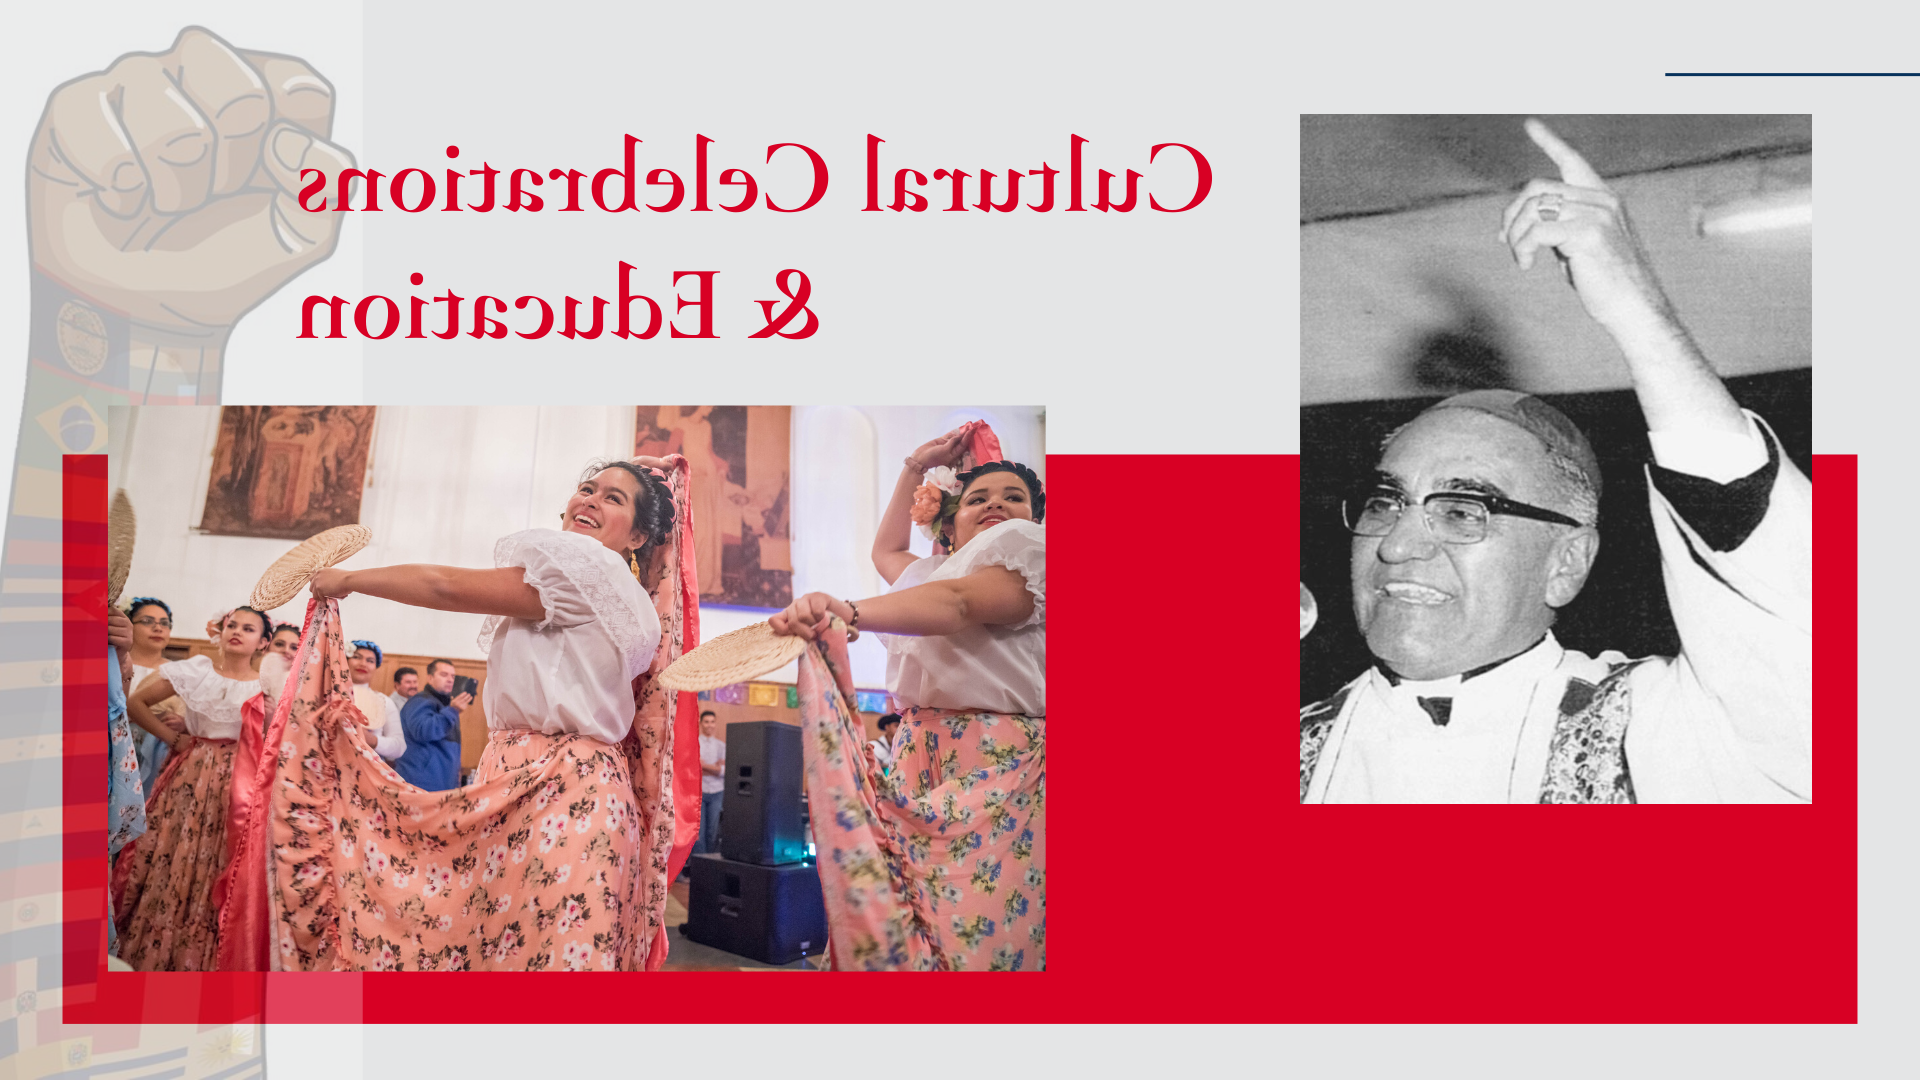 Red and grey banner with the words "Cultural Celebrations and Education" and an image of Oscar Romero and an image of dancers at a cultural celebration